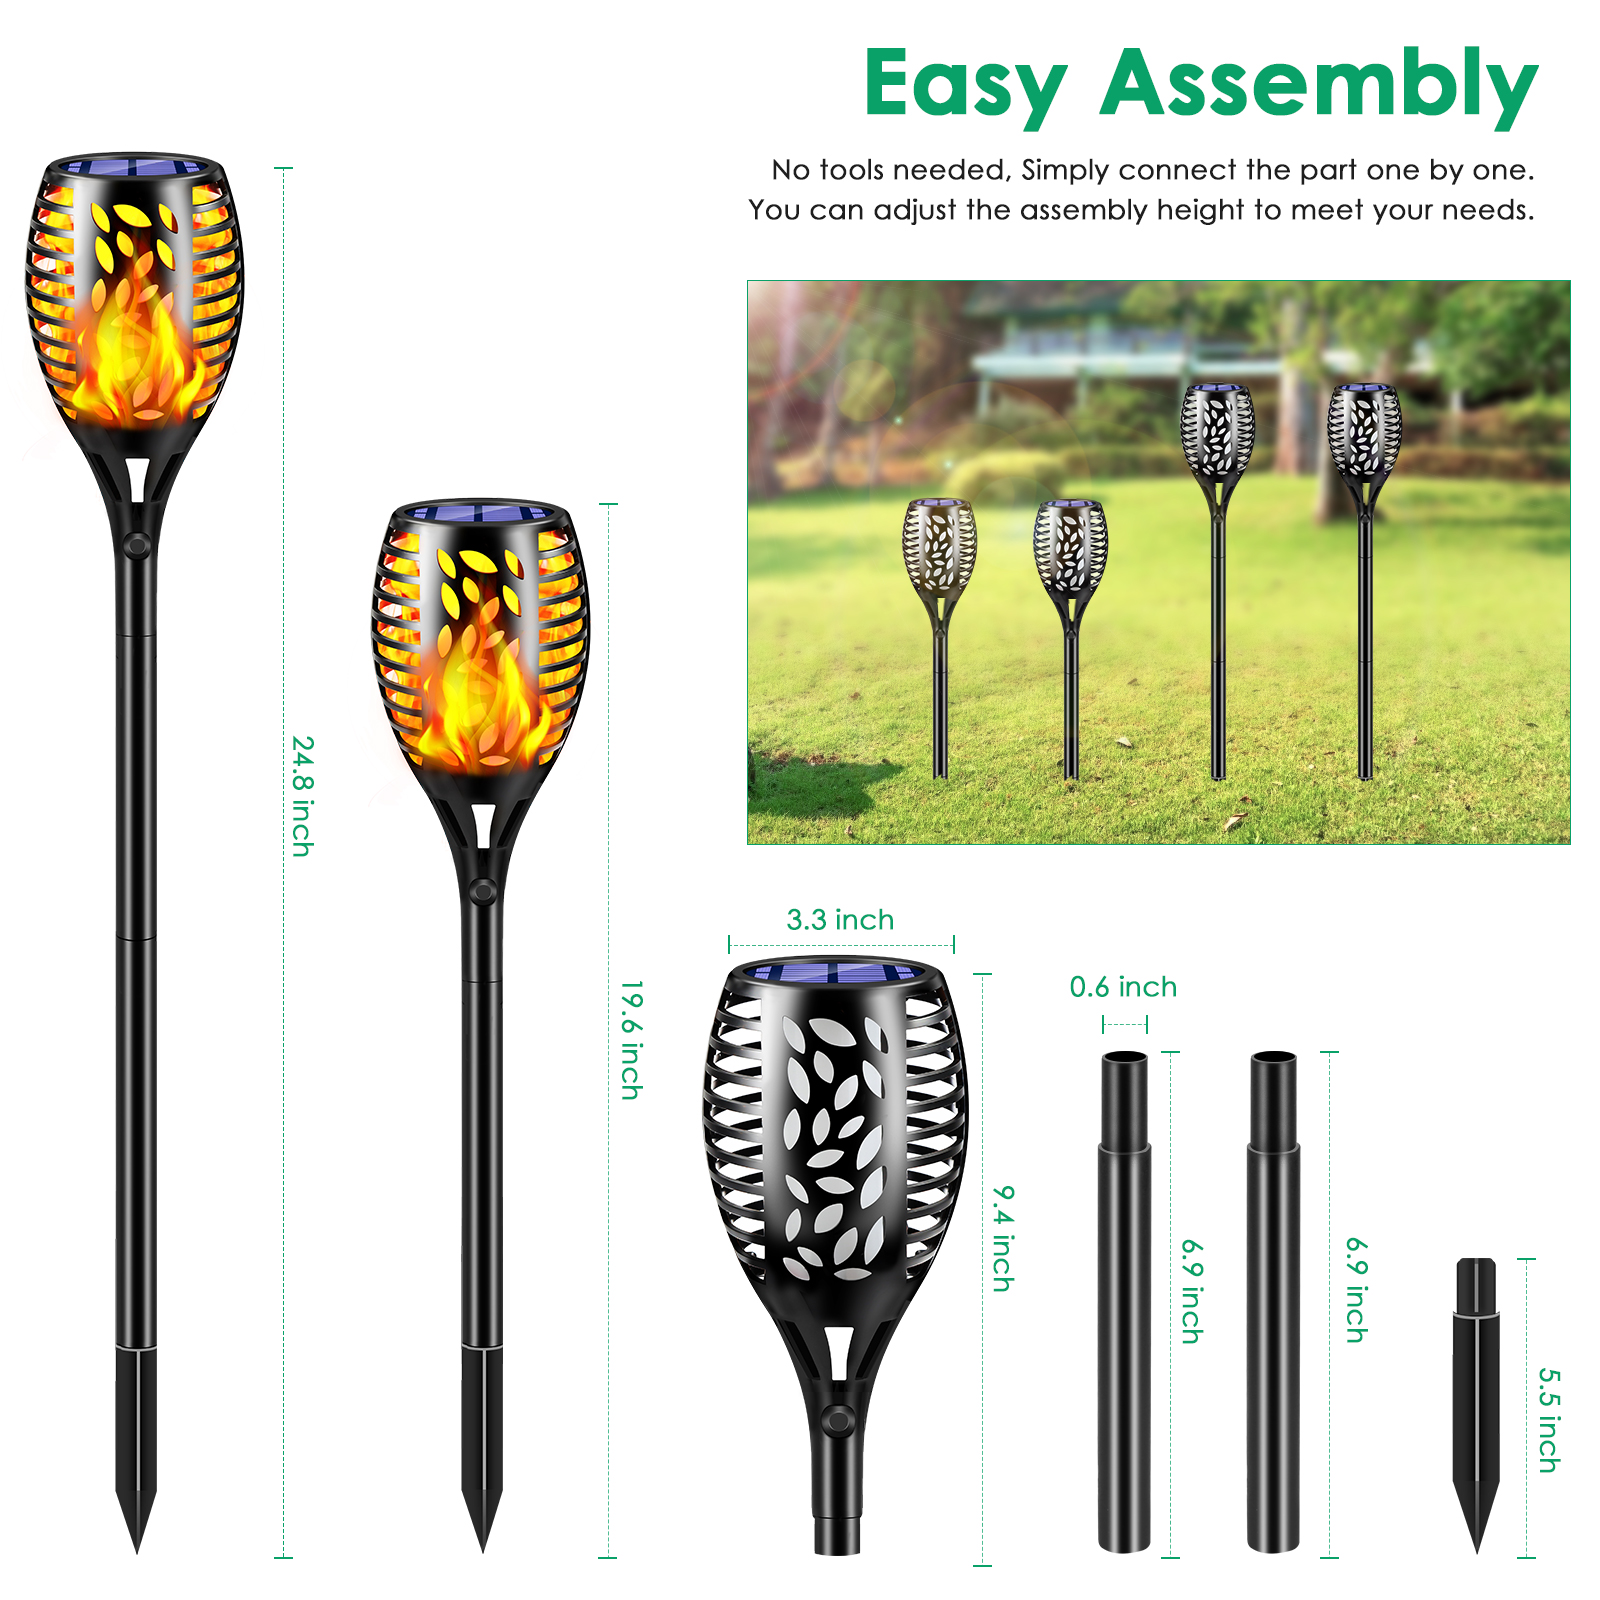 TomCare Solar Lights Outdoor 8 Pack Flickering Flames Solar Torches Lights Outdoor Solar Landscape Landscape Decoration Lighting Dusk to Dawn Auto On/Off Pathway Lights for Garden Patio Driveway